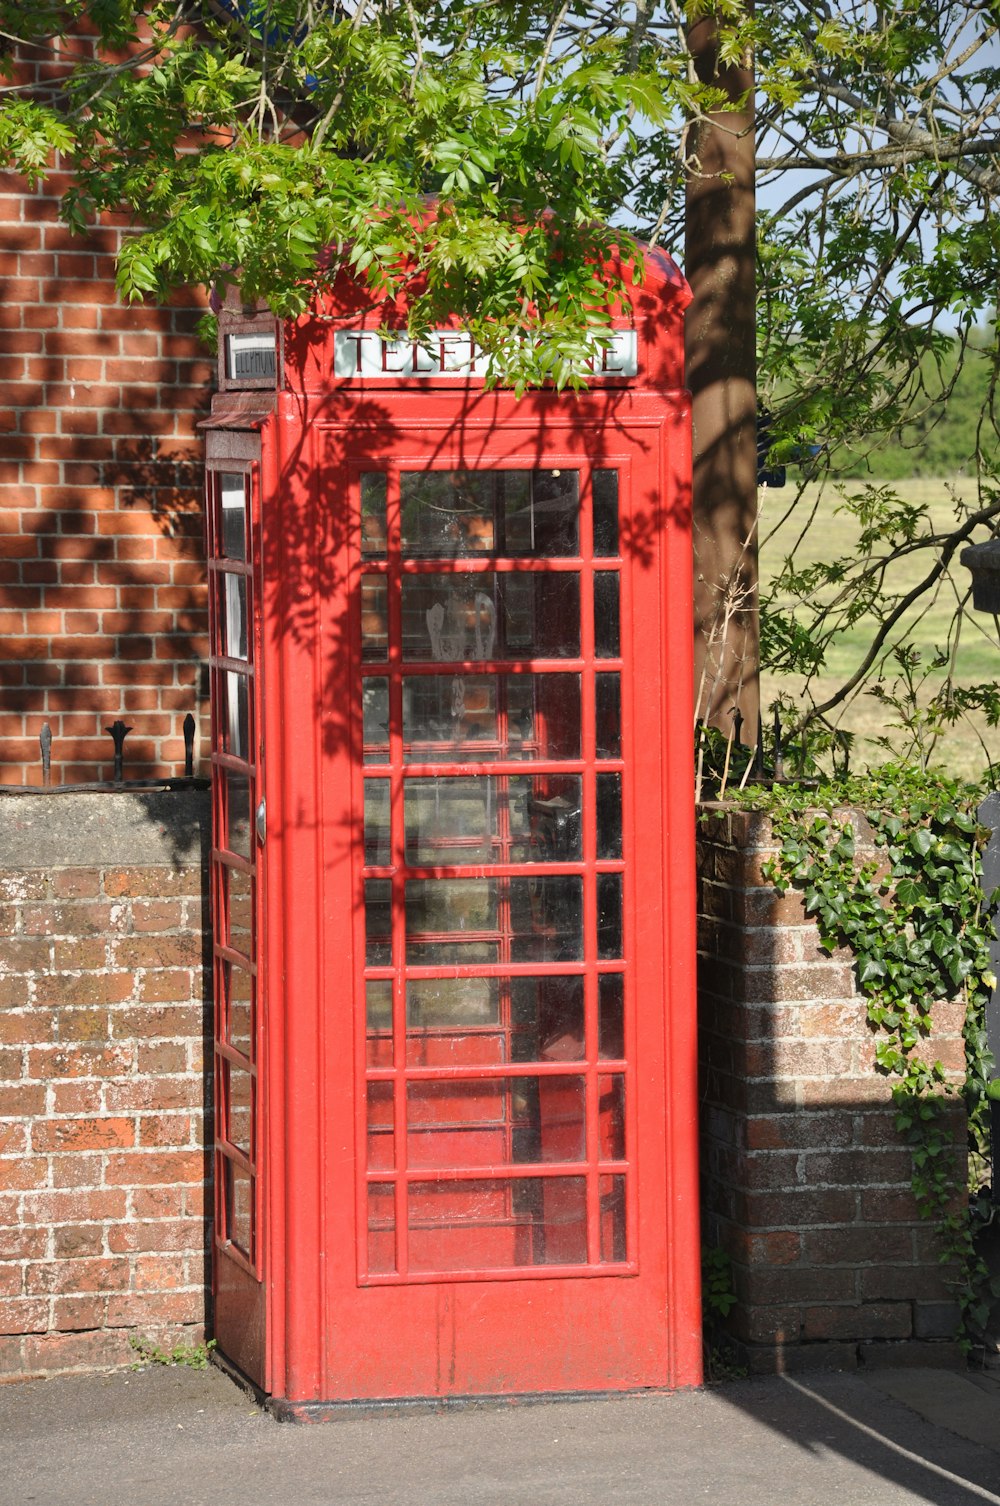 a red phone booth sitting next to a tree